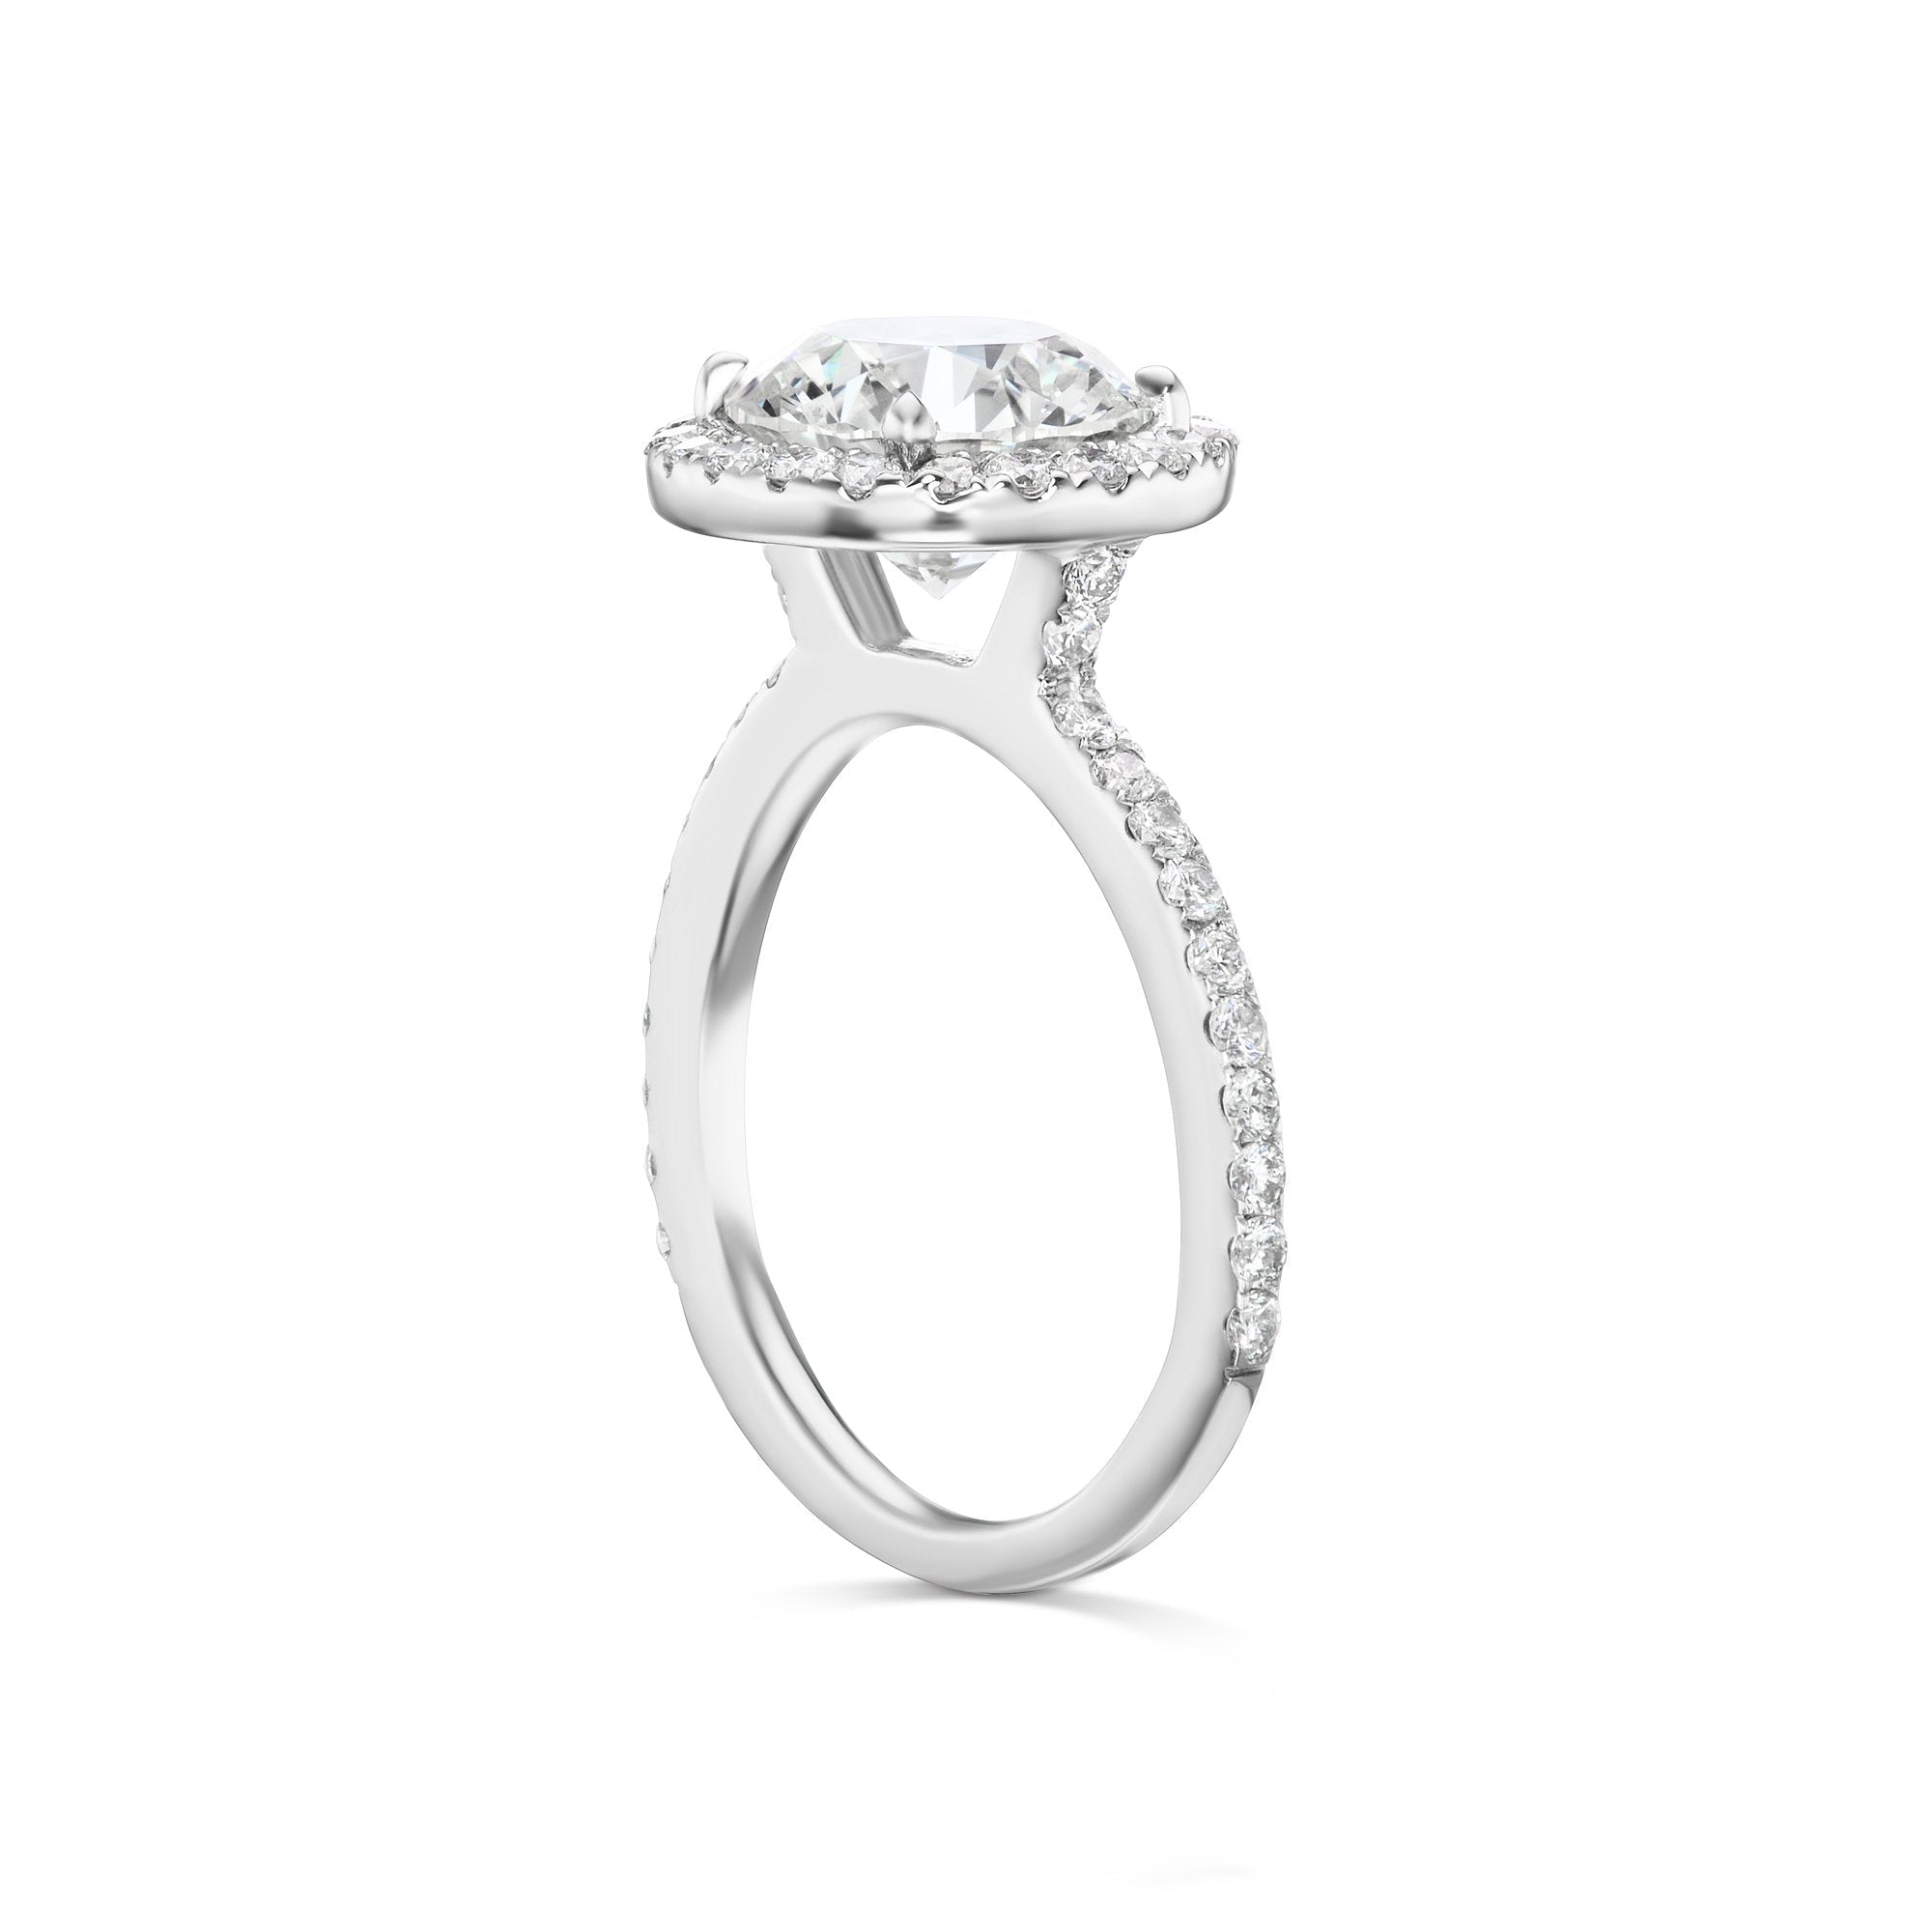 Diamond Ring Round Cut 3 Carat Halo Ring in 18K White Gold Side View